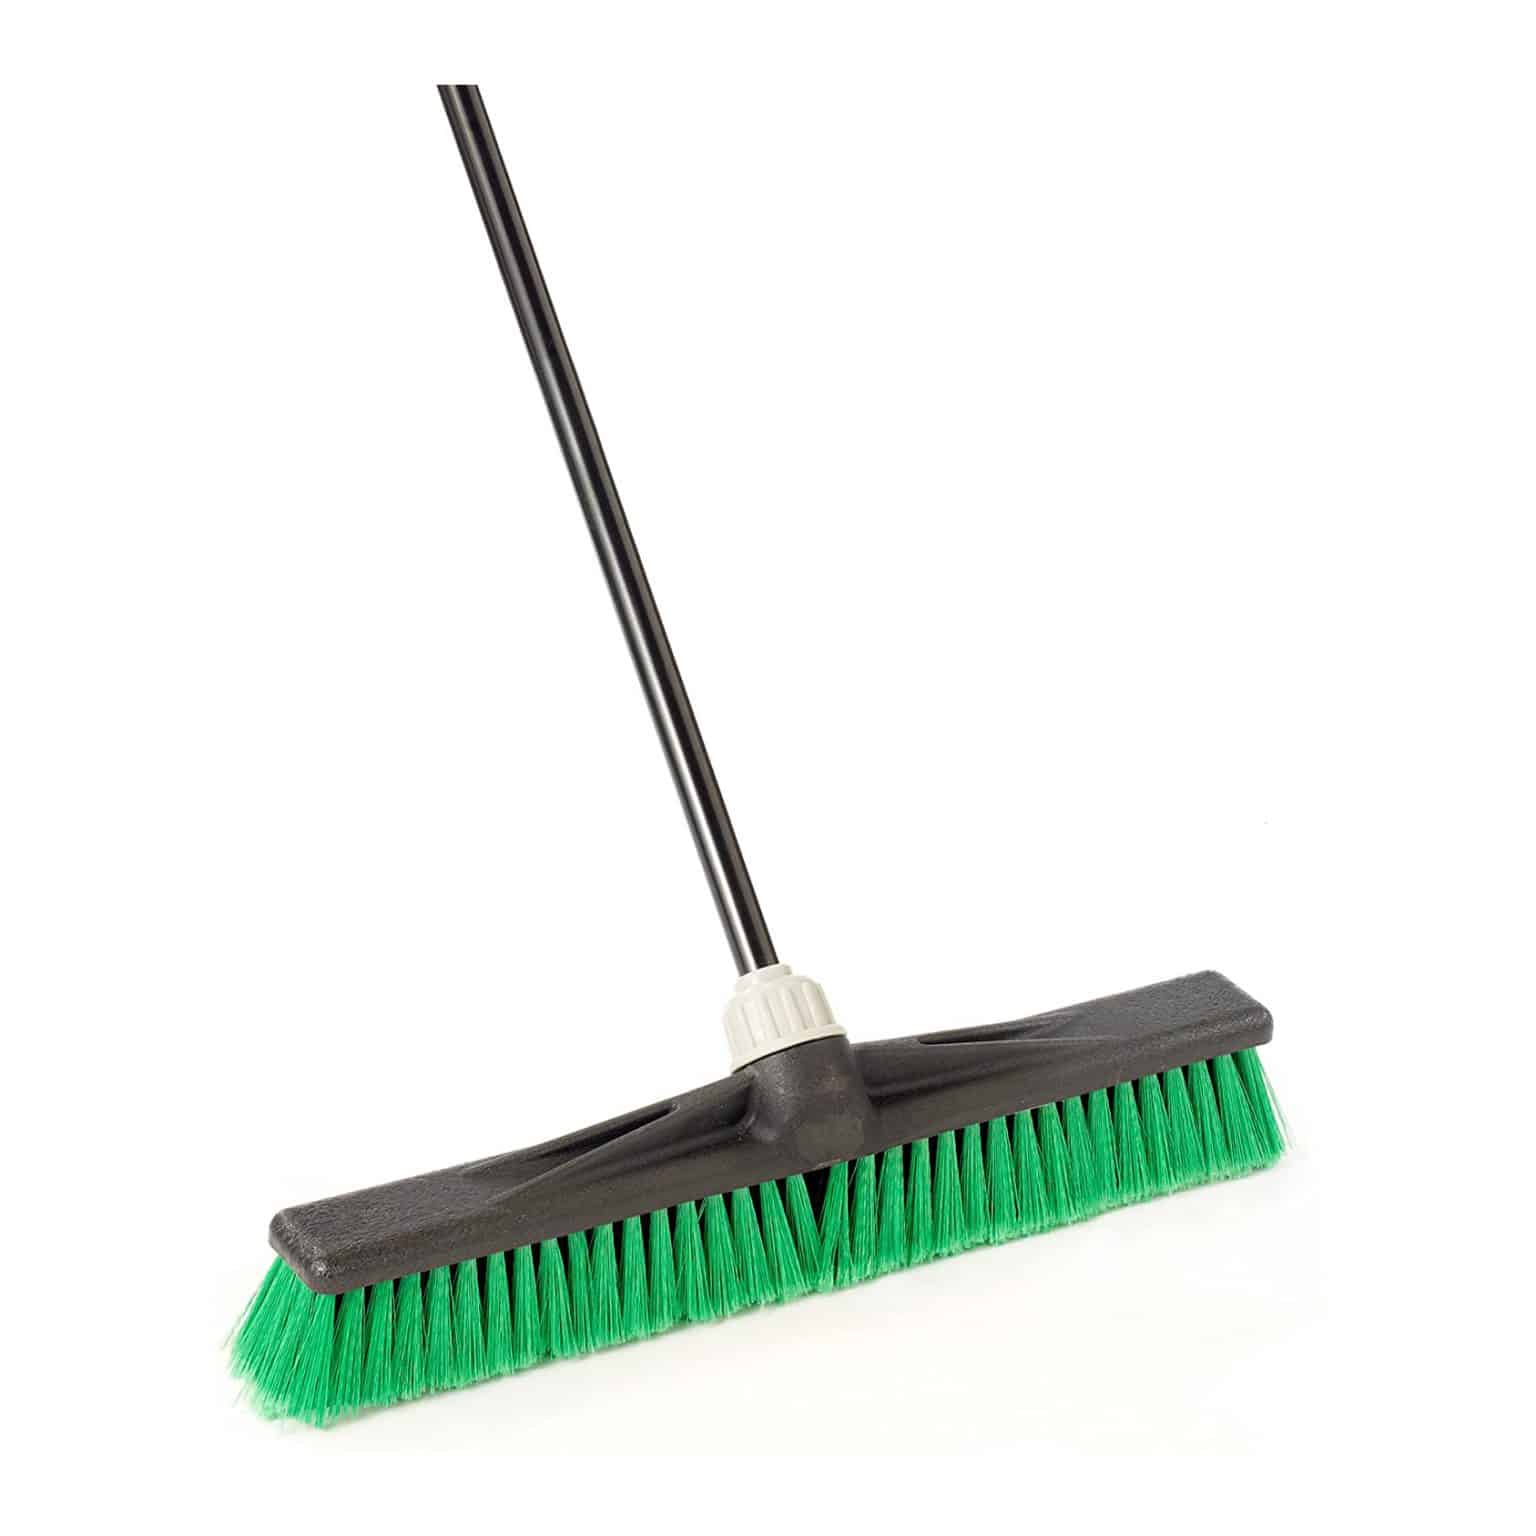 Top 10 Best Push Brooms in 2022 Reviews - Show Guide Me